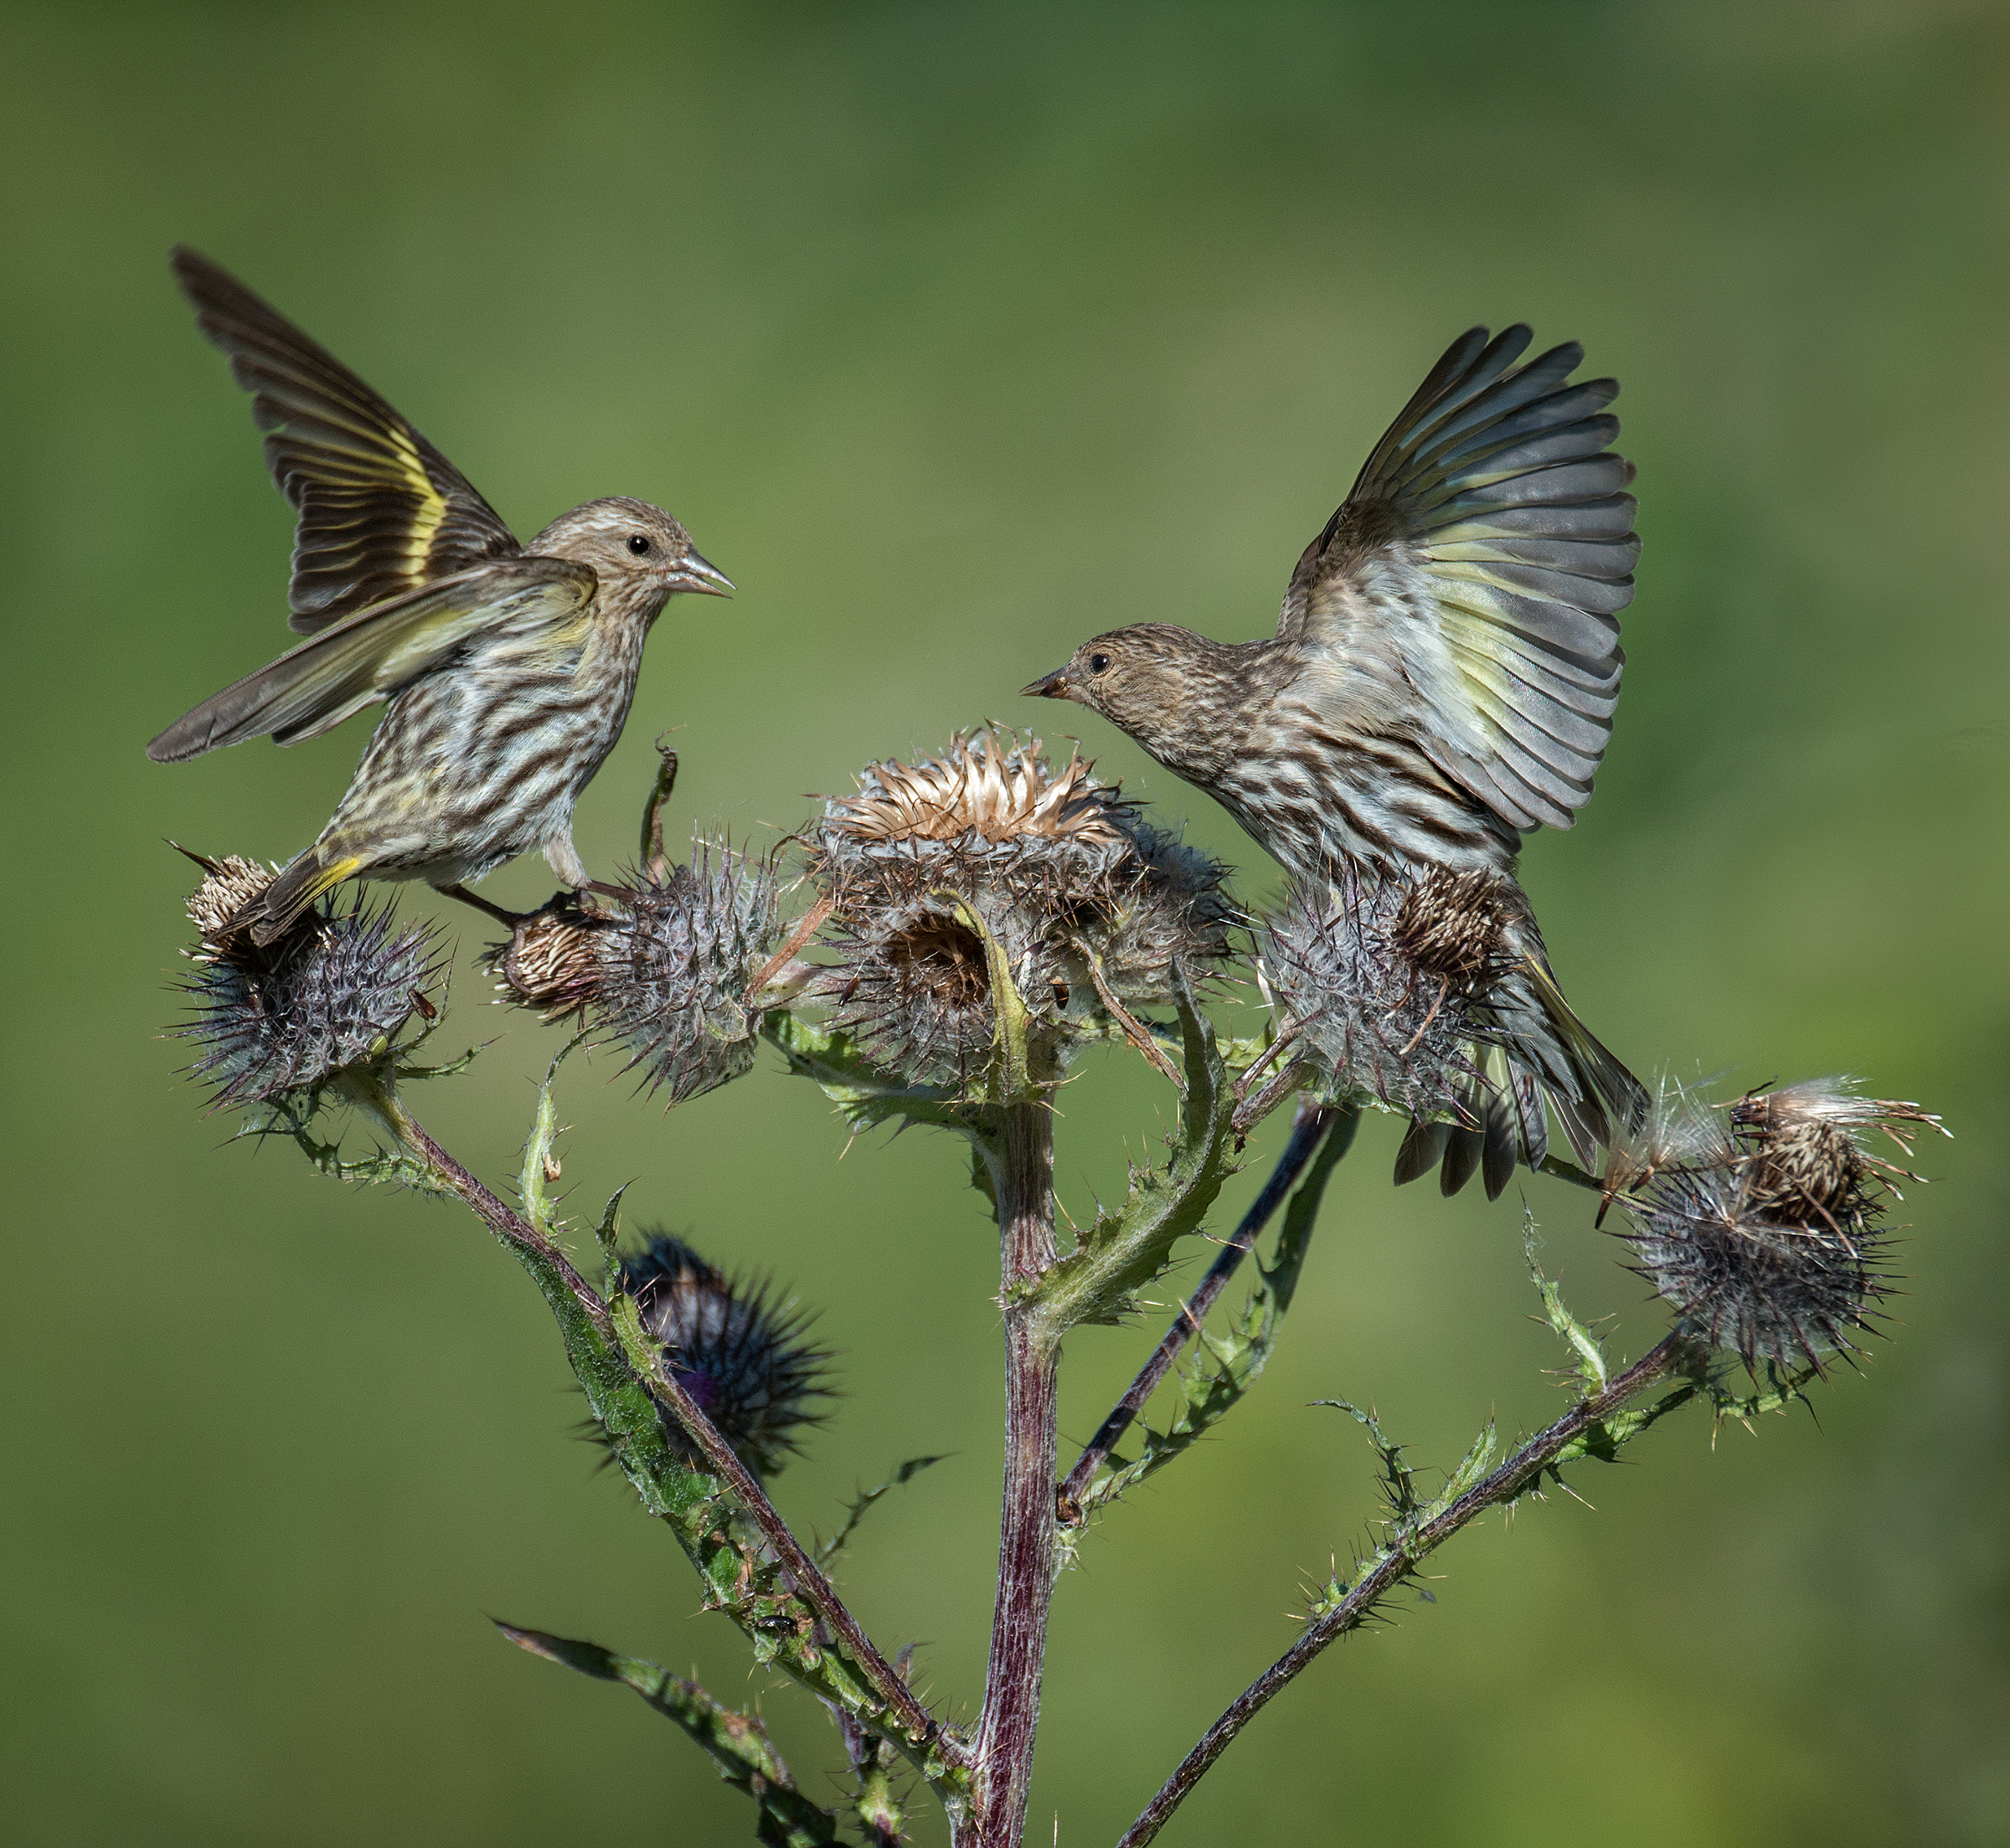 Two pine siskins, streaky with flashes of yellow, lift off, facing each other with wings fully extended upwards toward the sky. Behind the siskins, the background is a soft blurred variety of green foliage bringing the birds forward, so close you feel like you could touch them. 